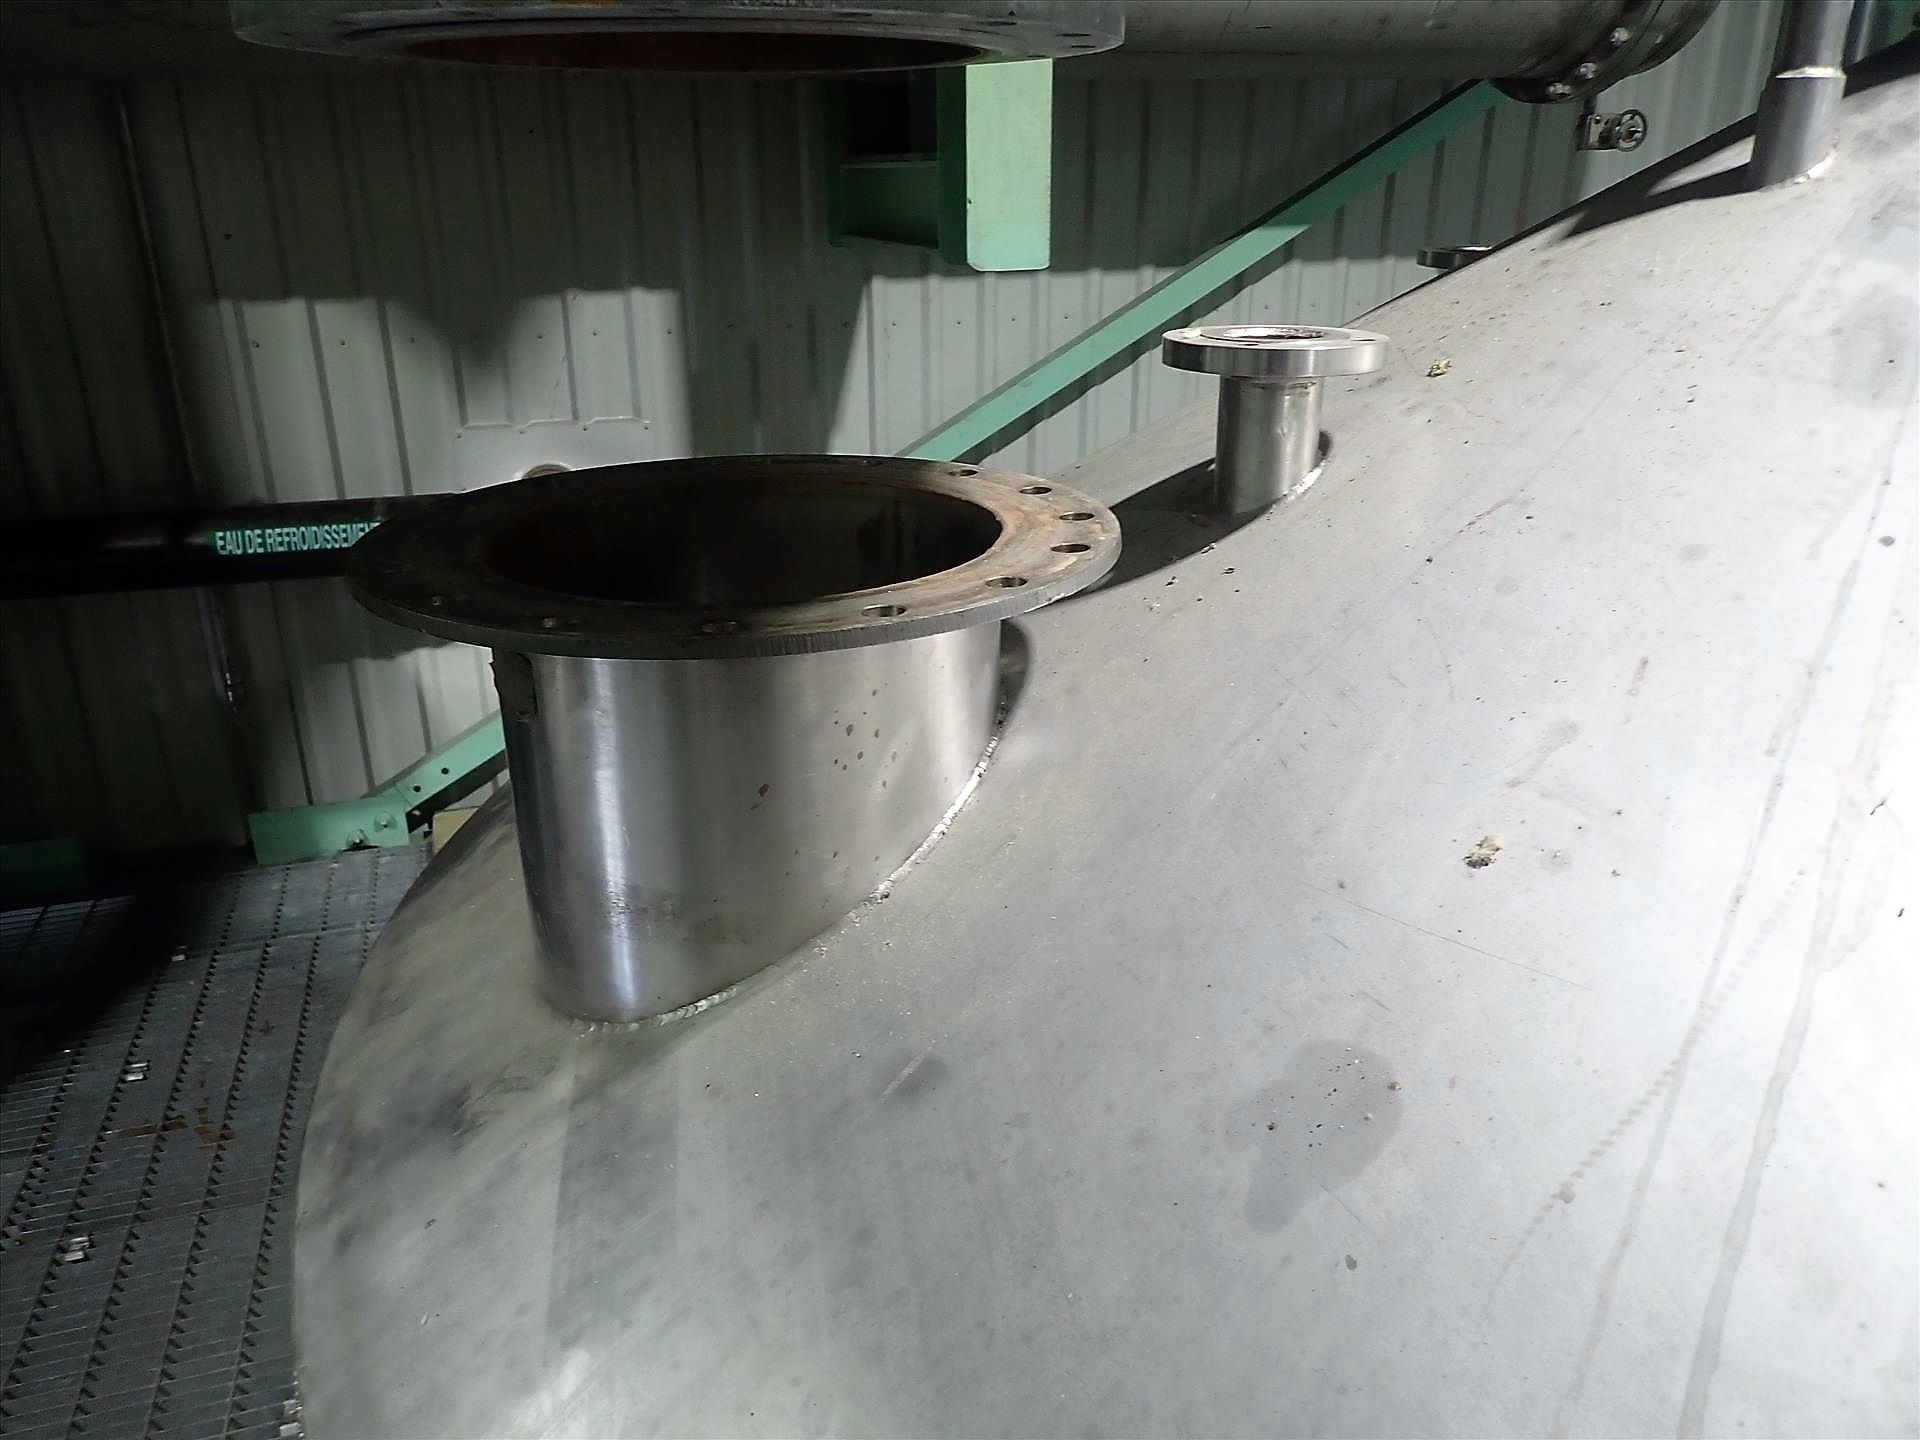 Inox-Tech Jacketed Tank 5400 gal., Stainless Steel, vertical. Internal rated 15 psi at 130 degrees - Image 4 of 11